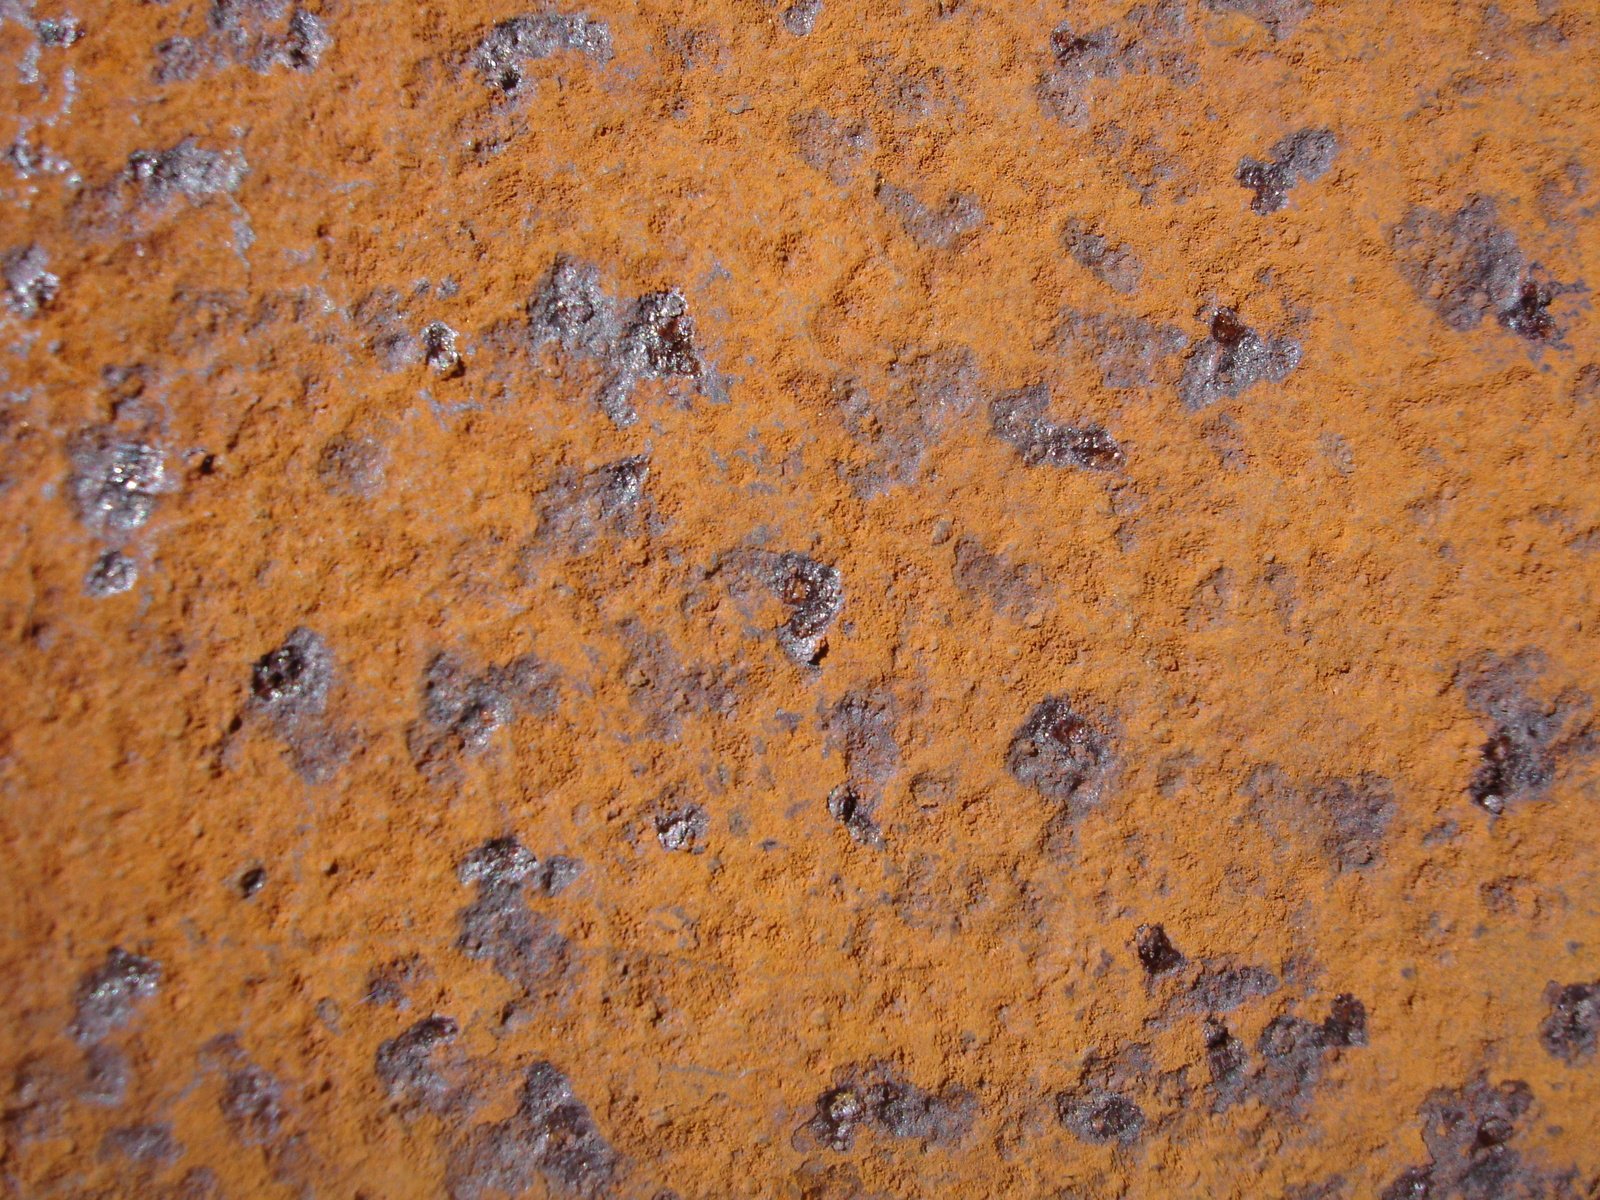 an orange surface with several holes and some brown stuff